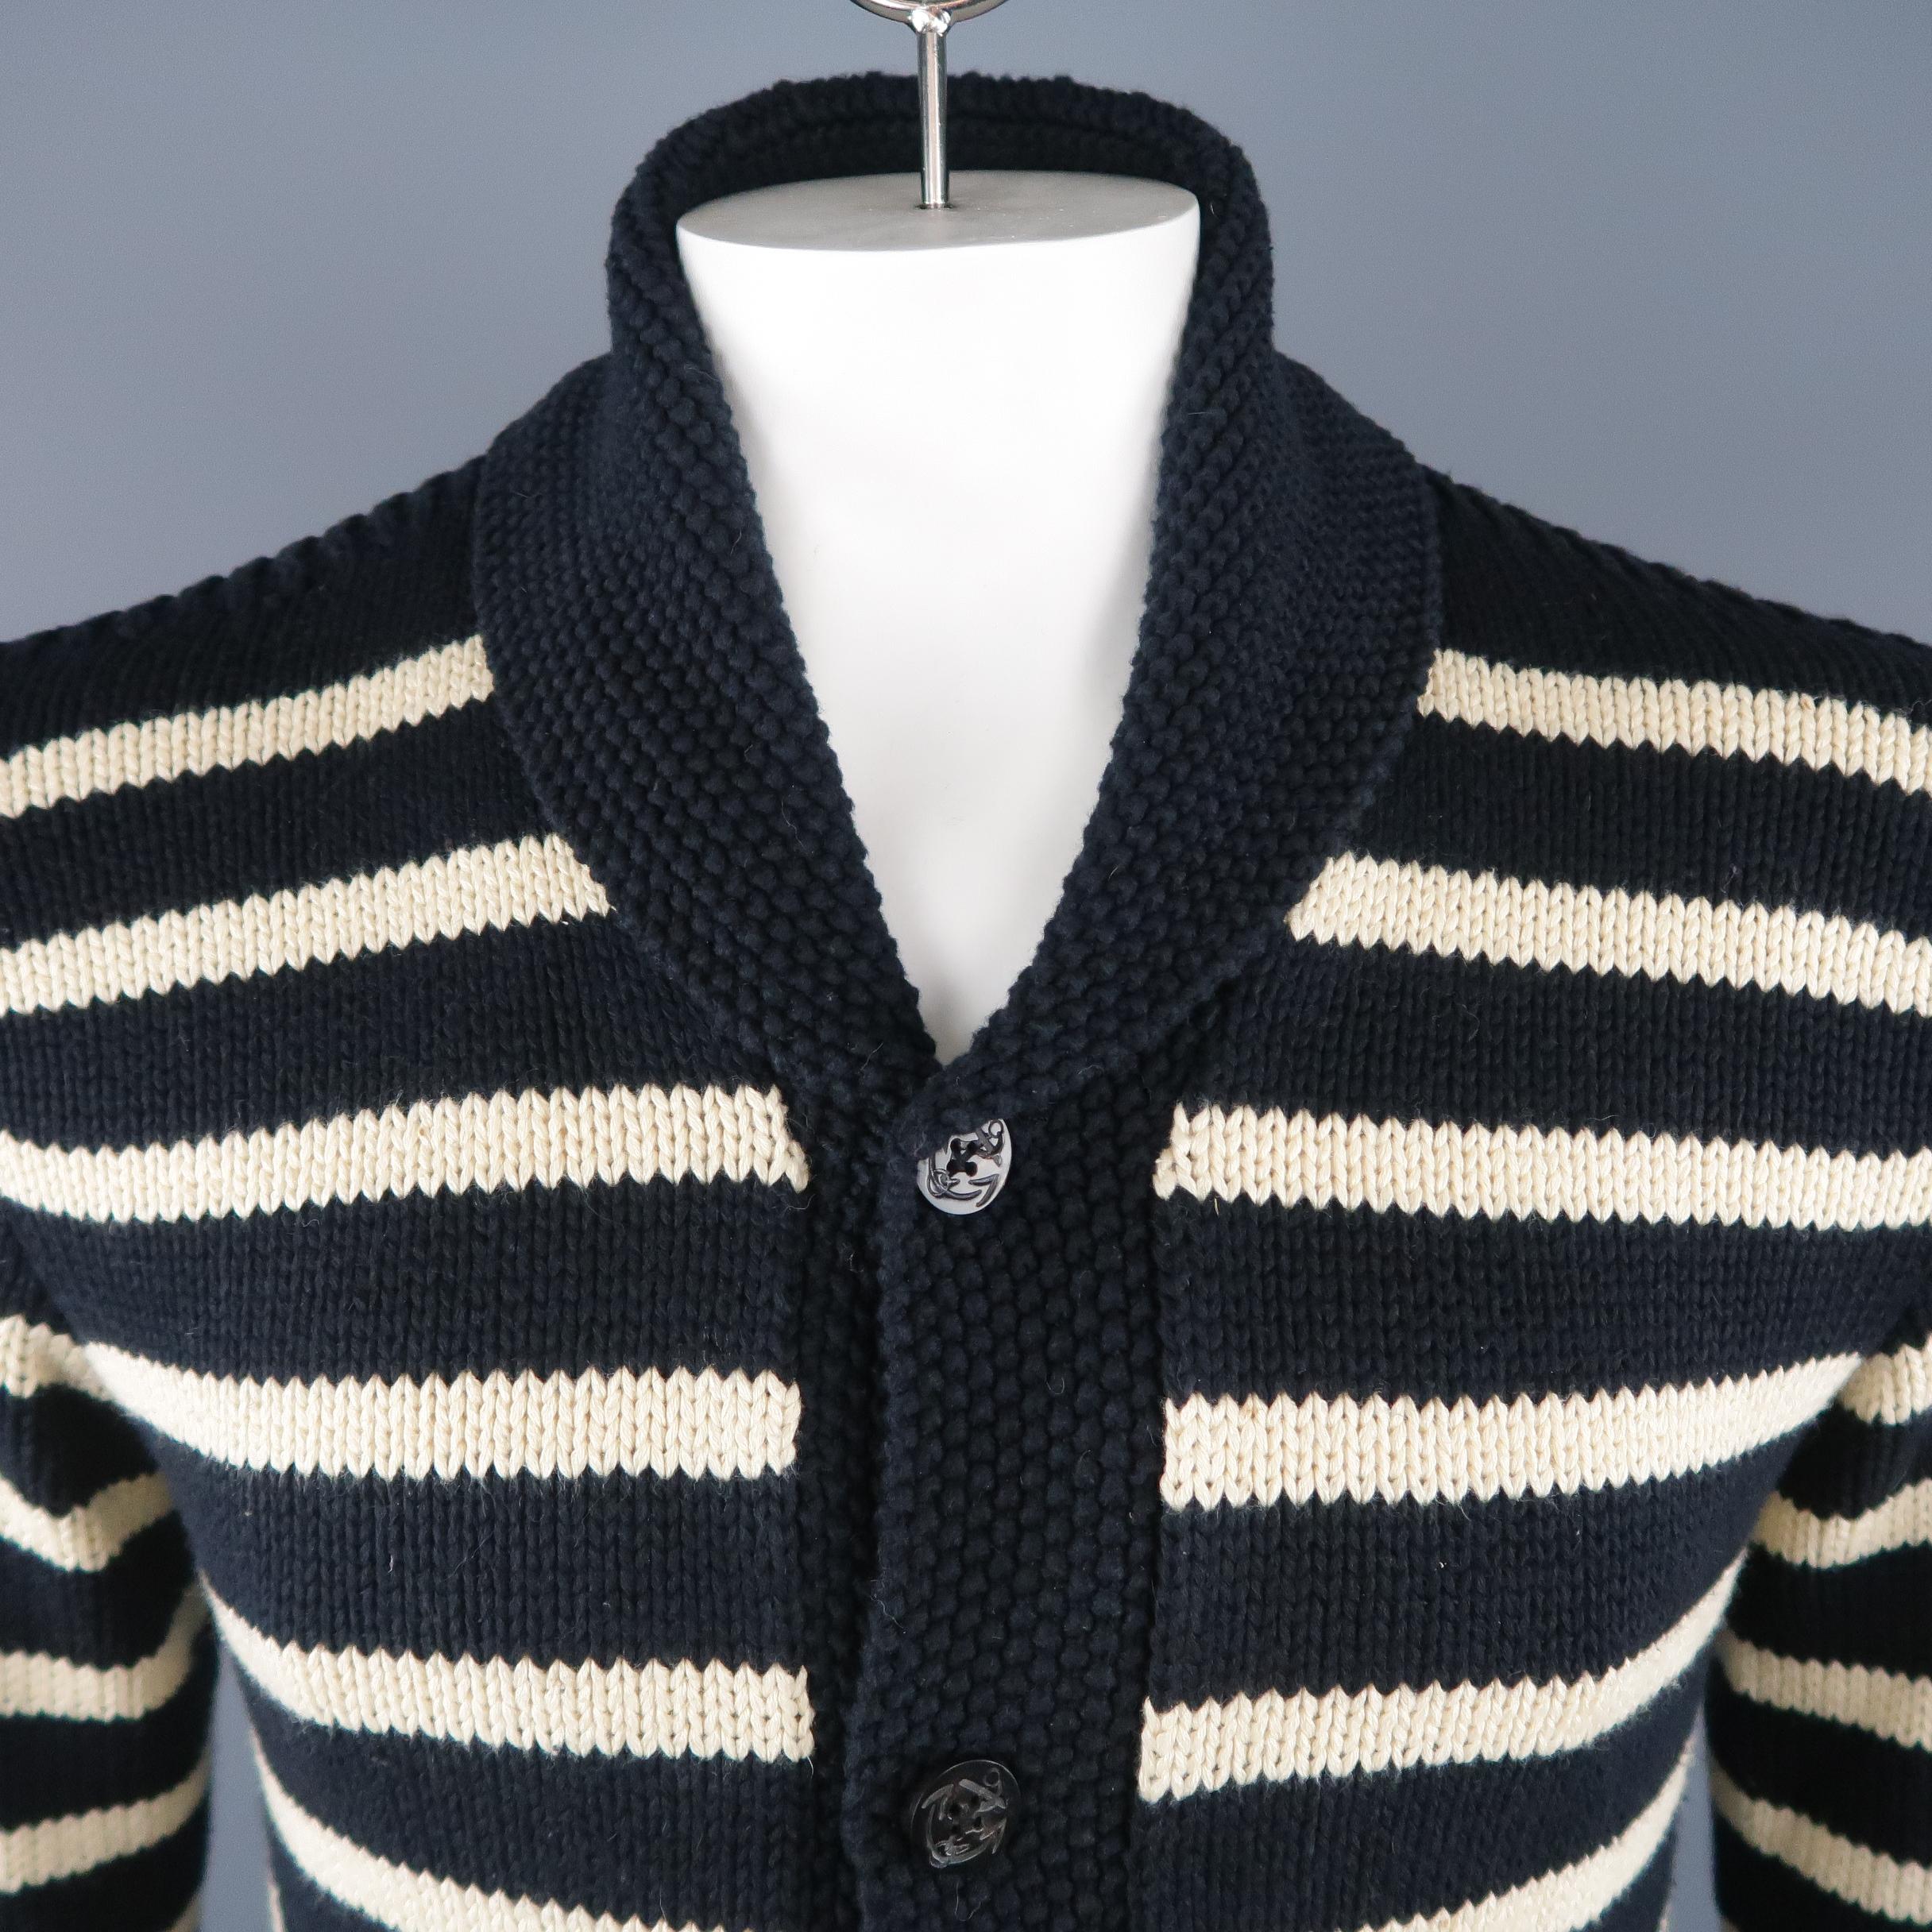 RRL by RALPH LAUREN Cardigan Sweater comes in navy and cream tones  in a striped cotton / wool hand knit material, with a shawl collar, 5 buttons at closure, patch  pockets and ribbed cuffs and hem.
 
Excellent Pre-Owned Condition.
Marked: M
